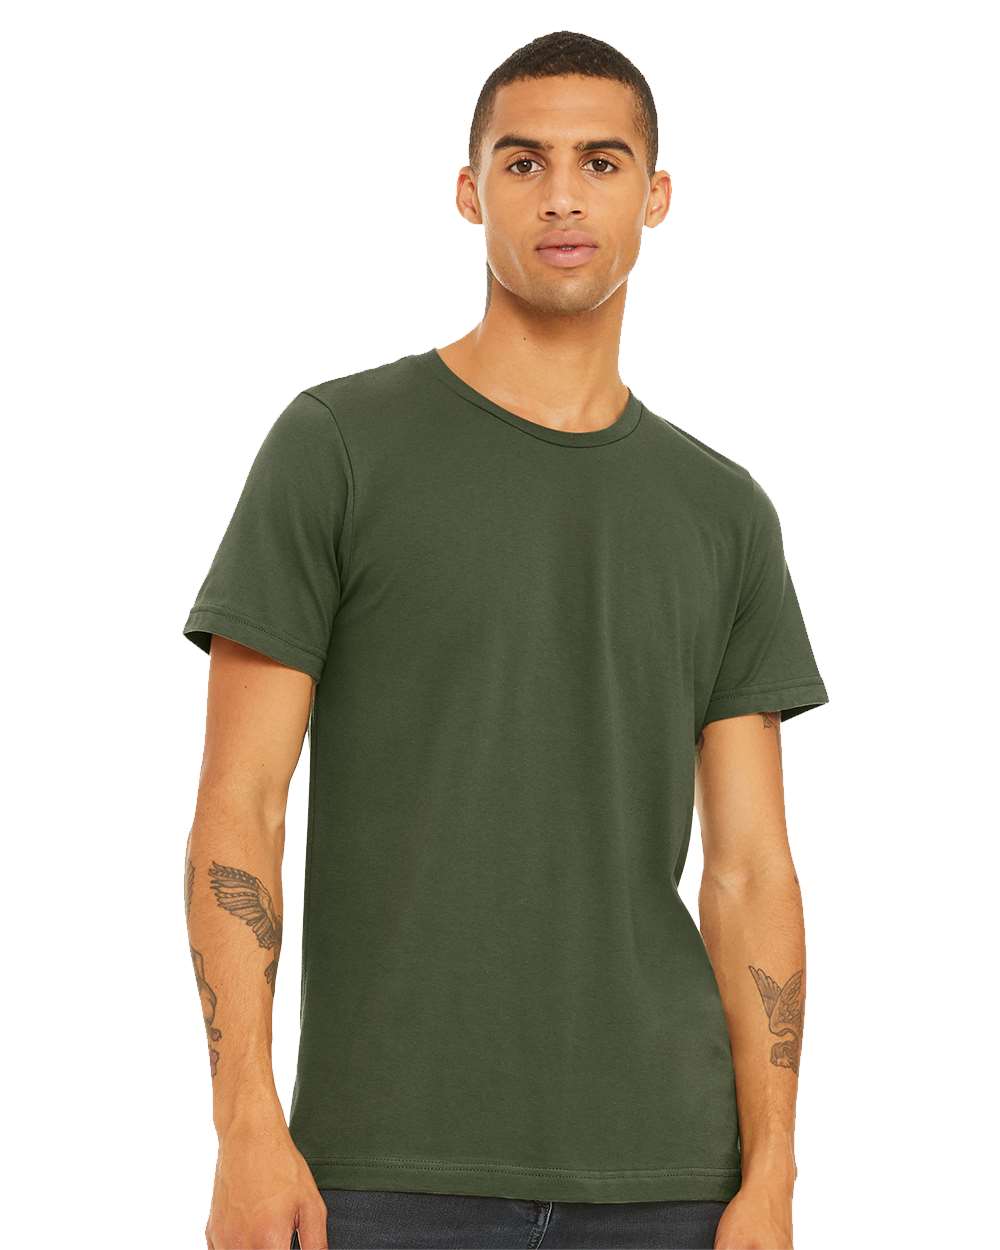 BELLA + CANVAS - Jersey Tee - 3001 - Military Green